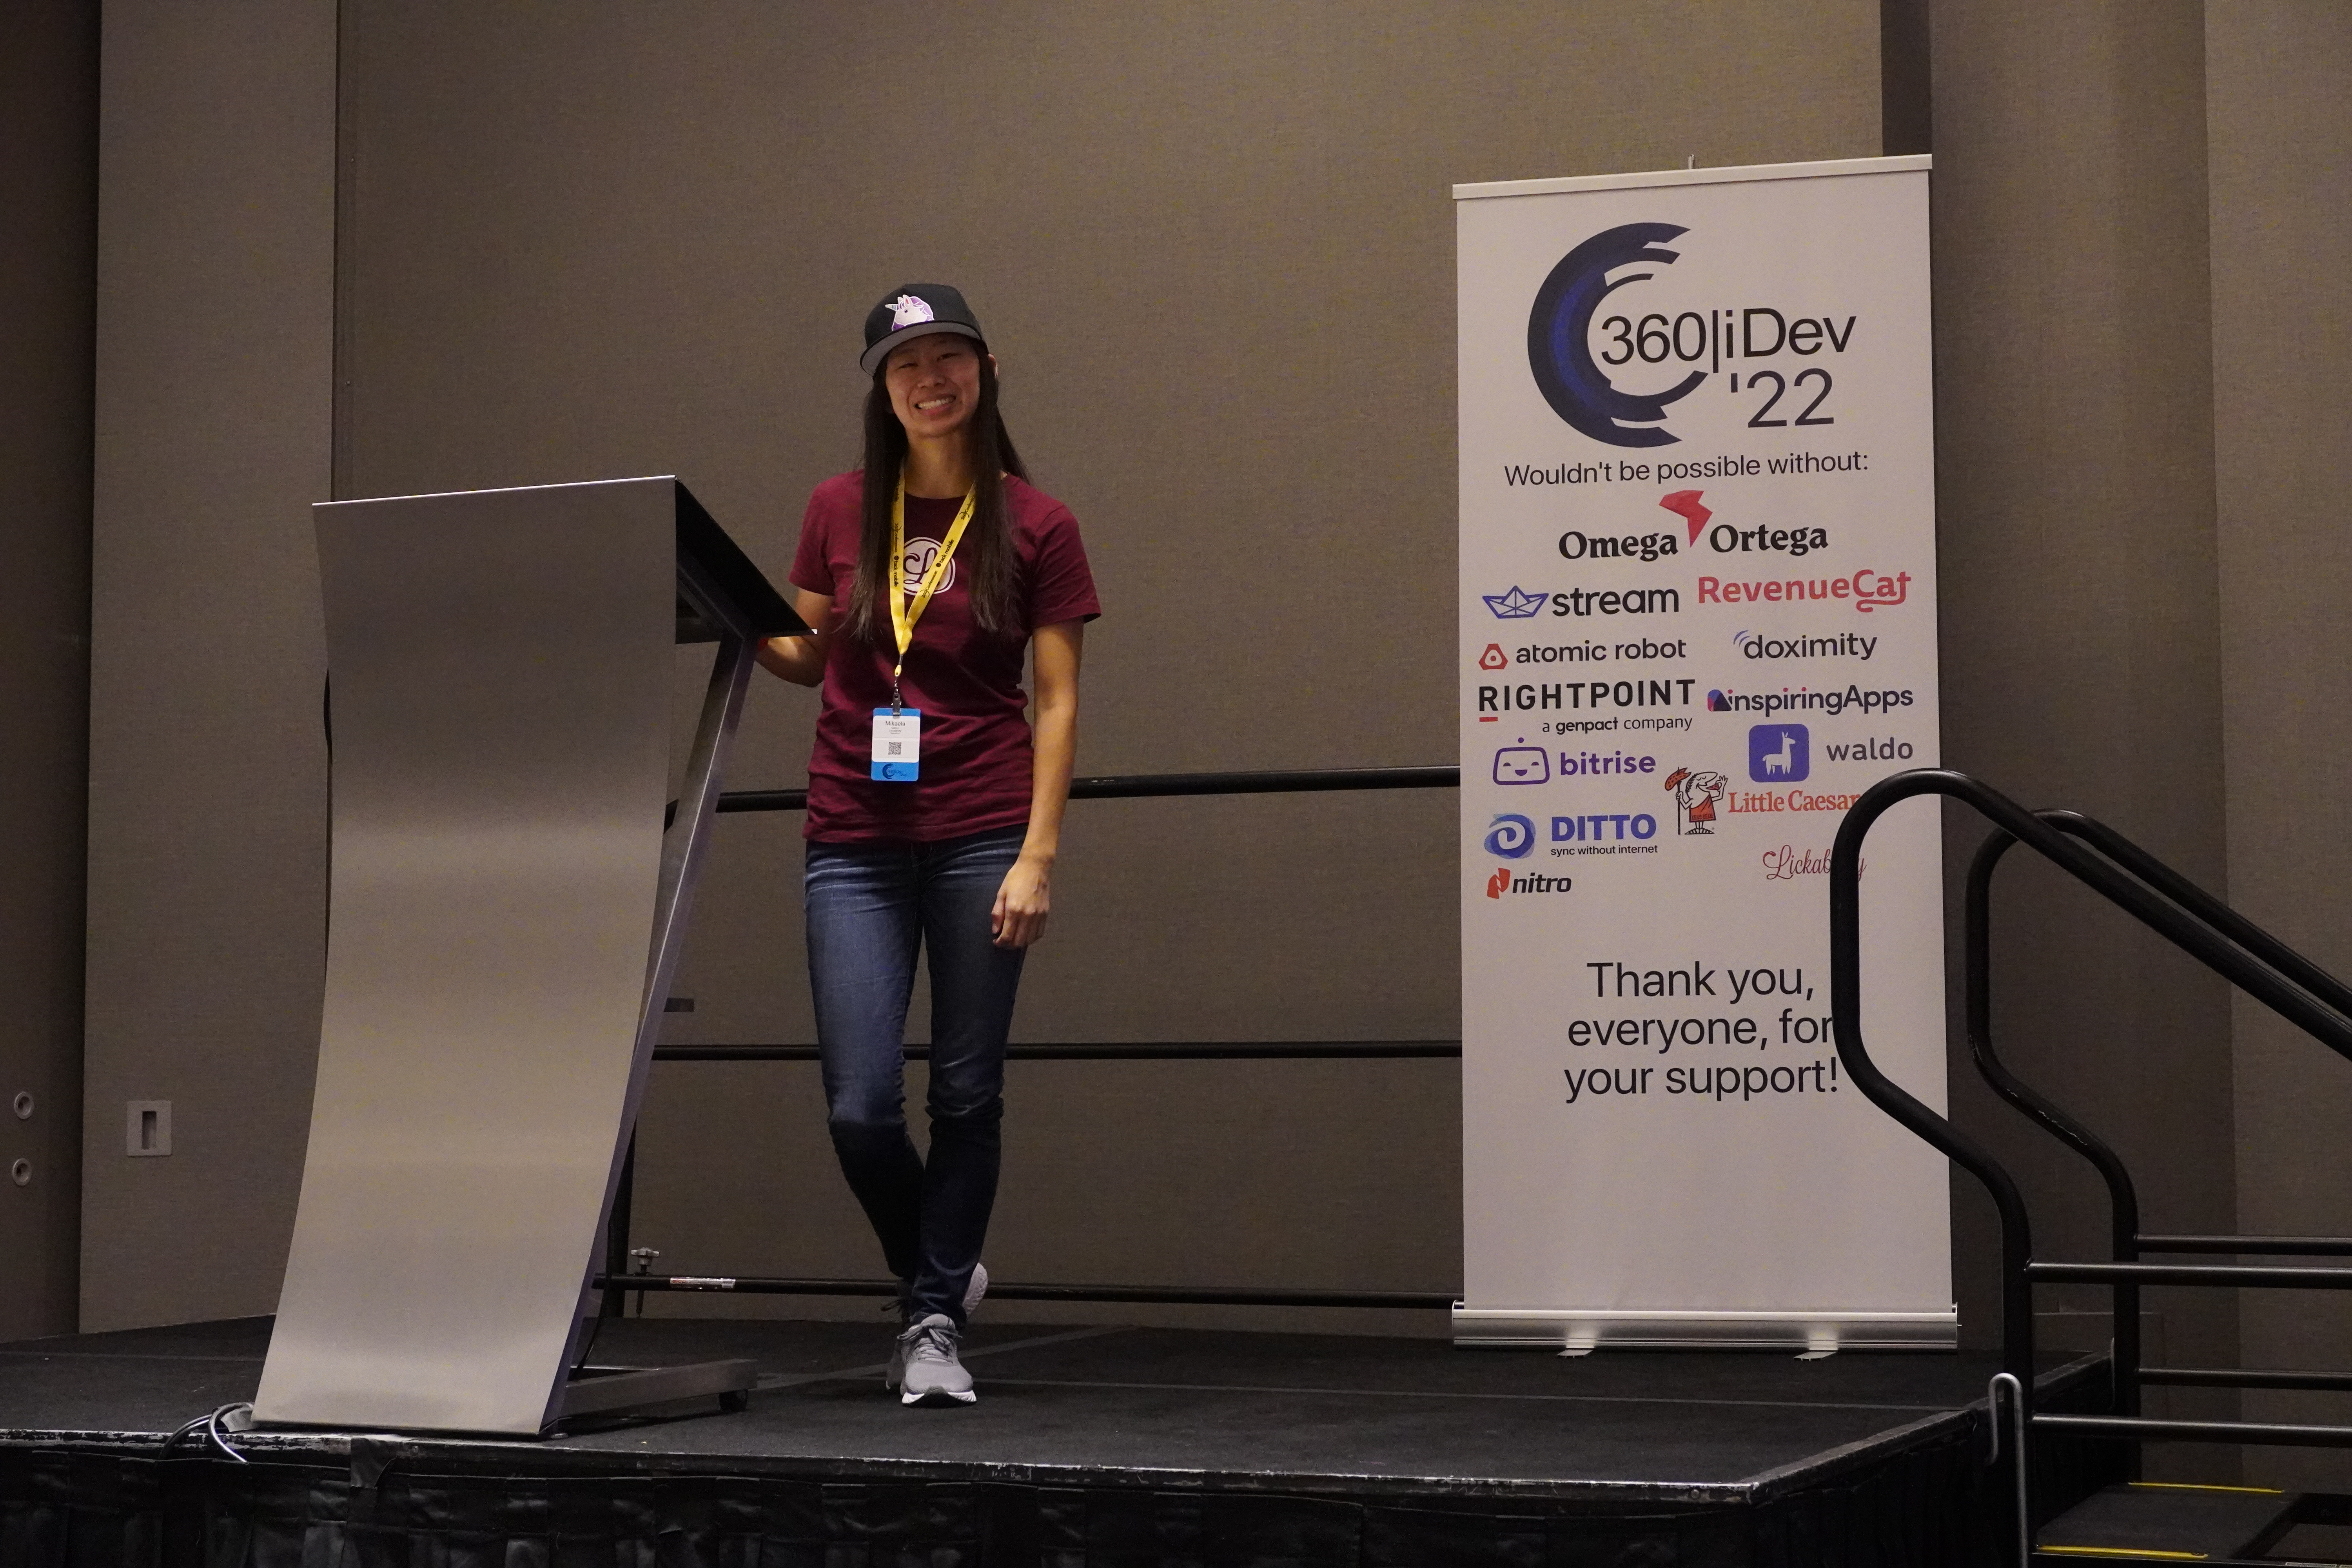 Mikaela Caron on stage for her talk at 360iDev